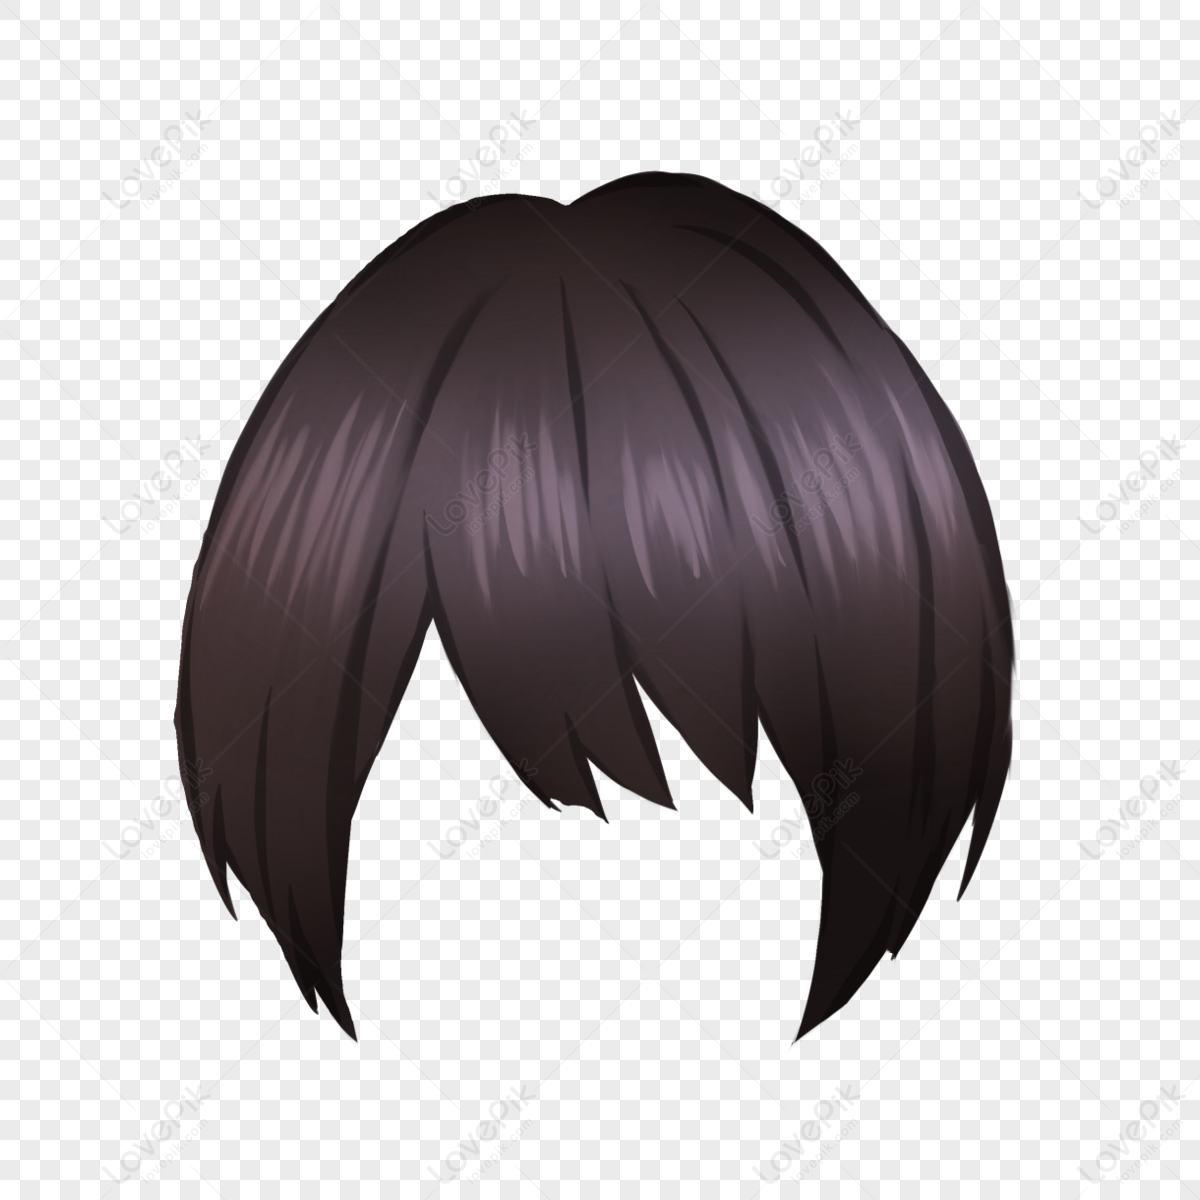 Boys Haircut PNG File - PNG All | PNG All